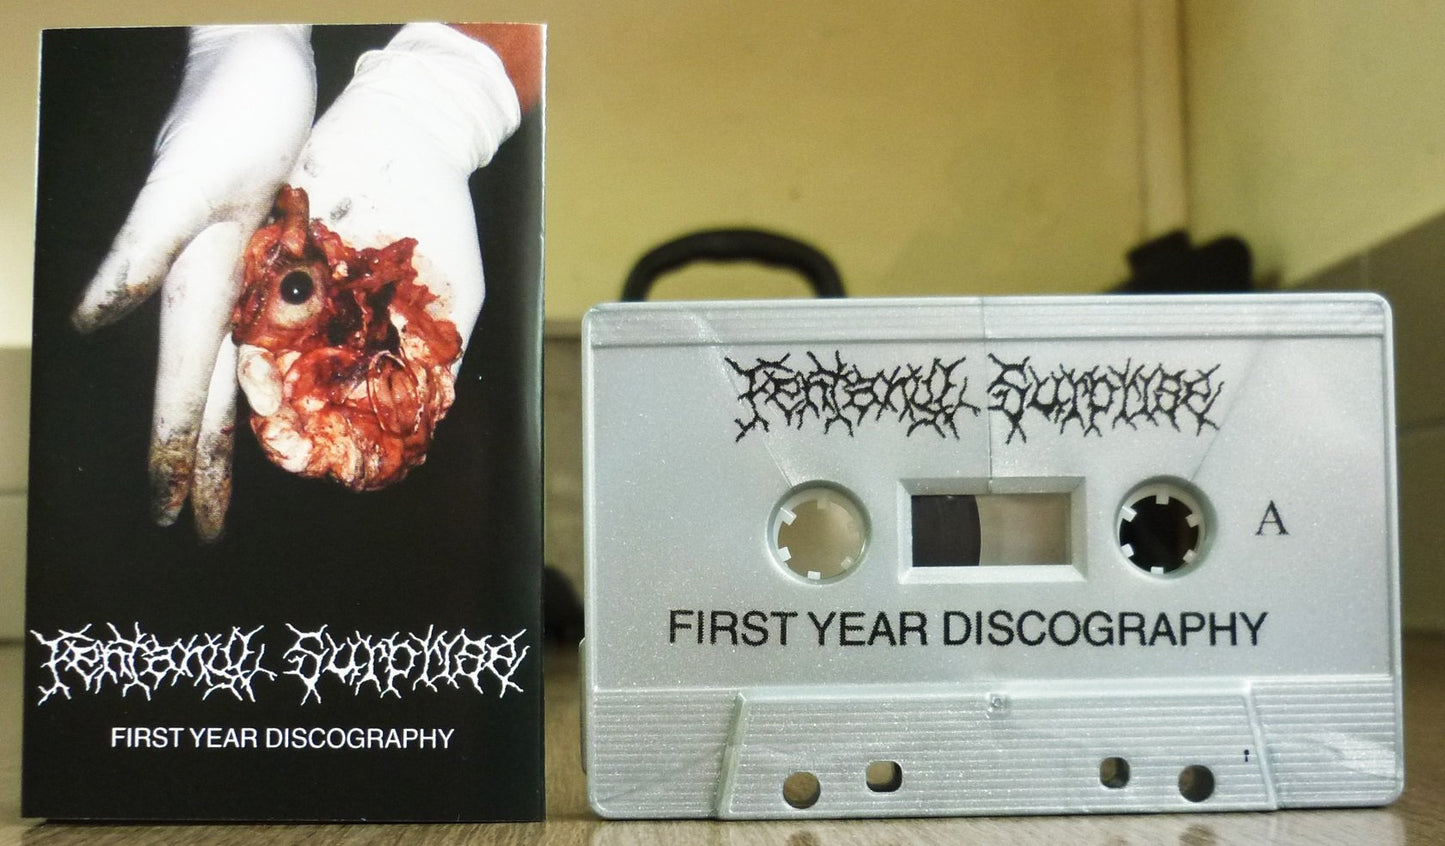 FENTANYL SURPRISE "First Year Discography" Tape